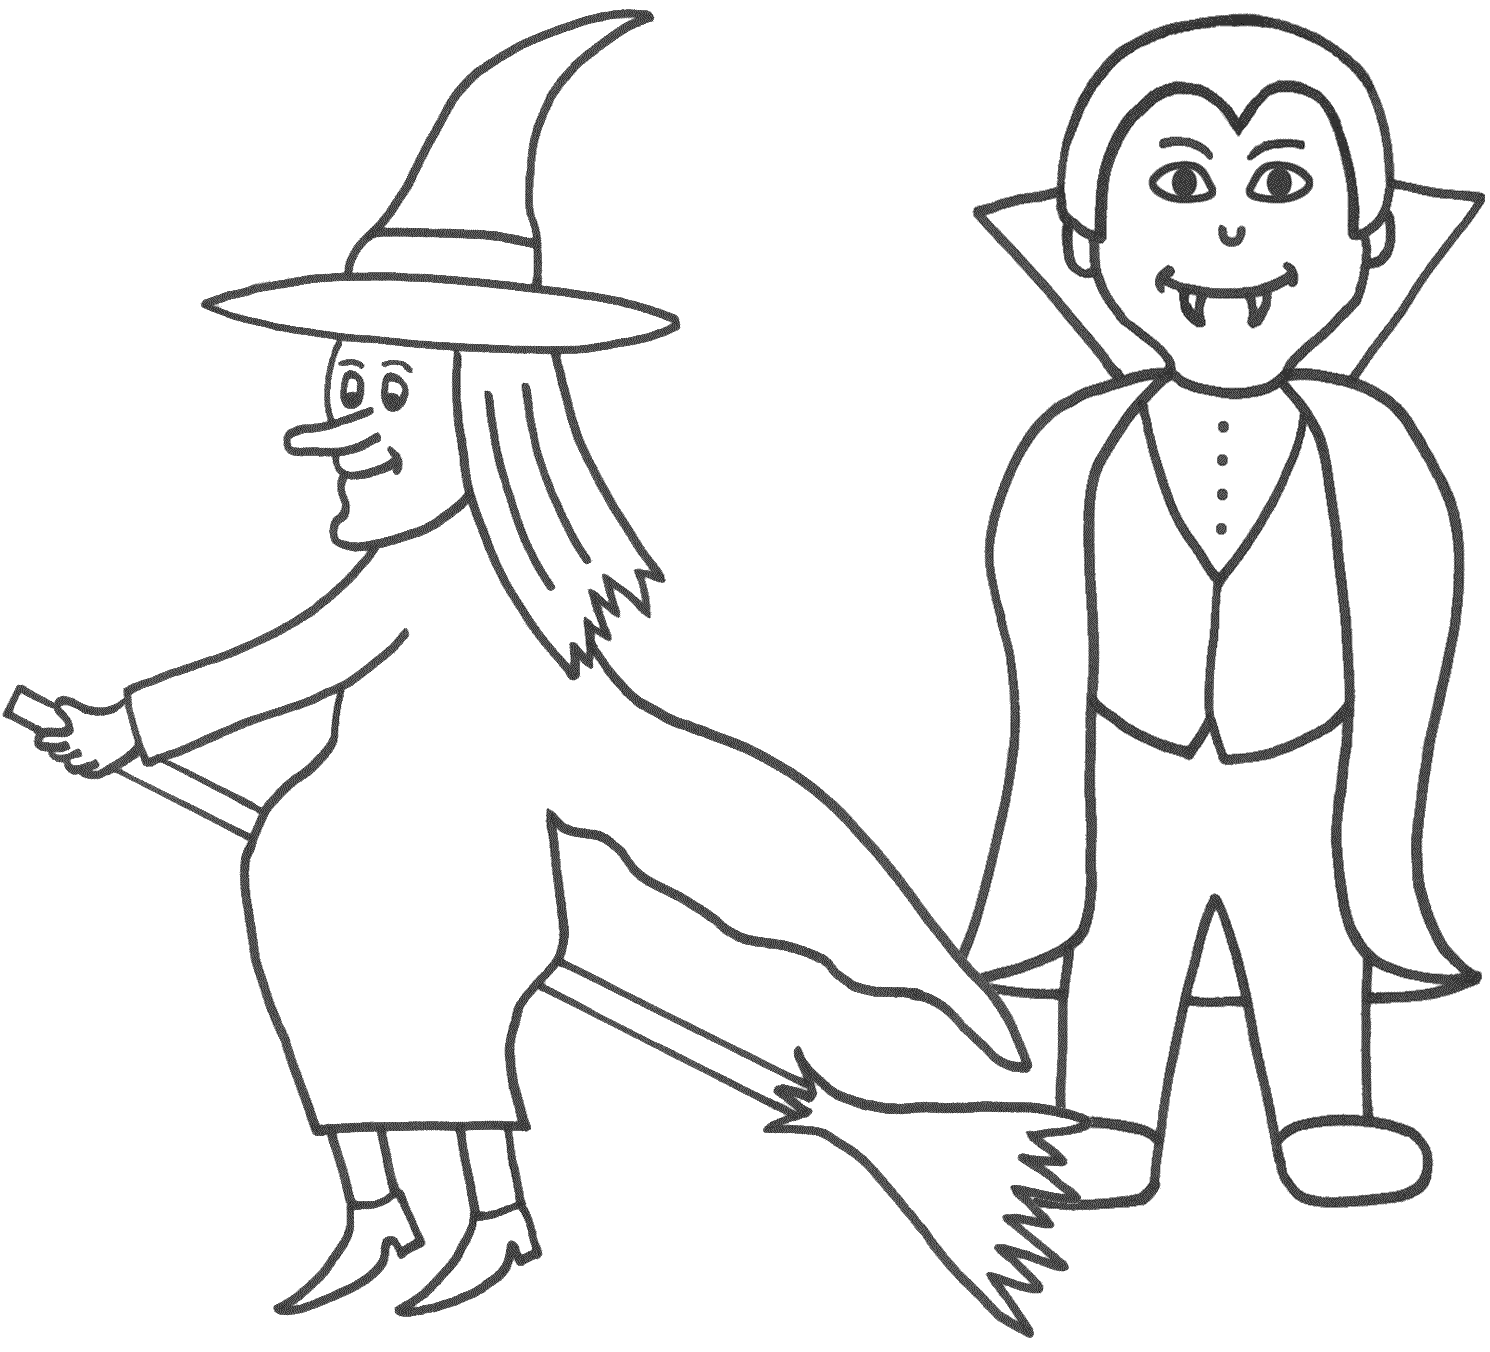 vampire-coloring-page-0025-q1